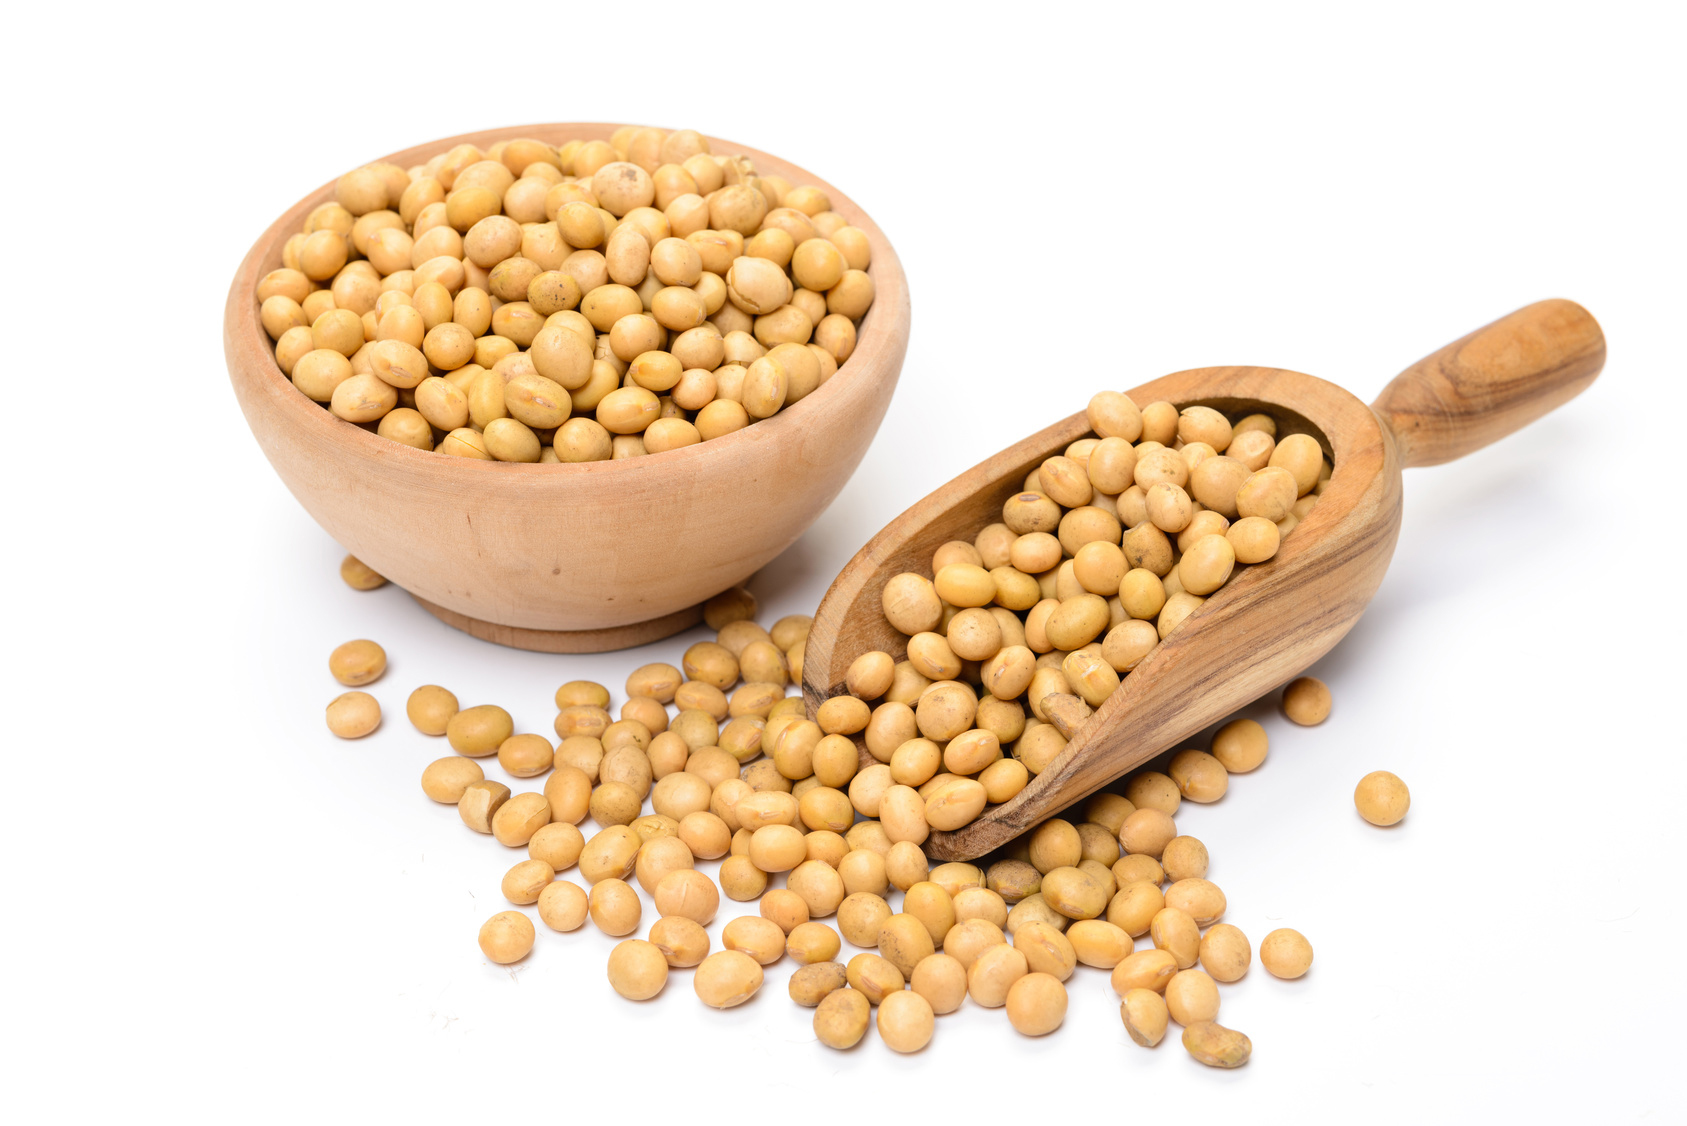 USES OF SOYBEAN